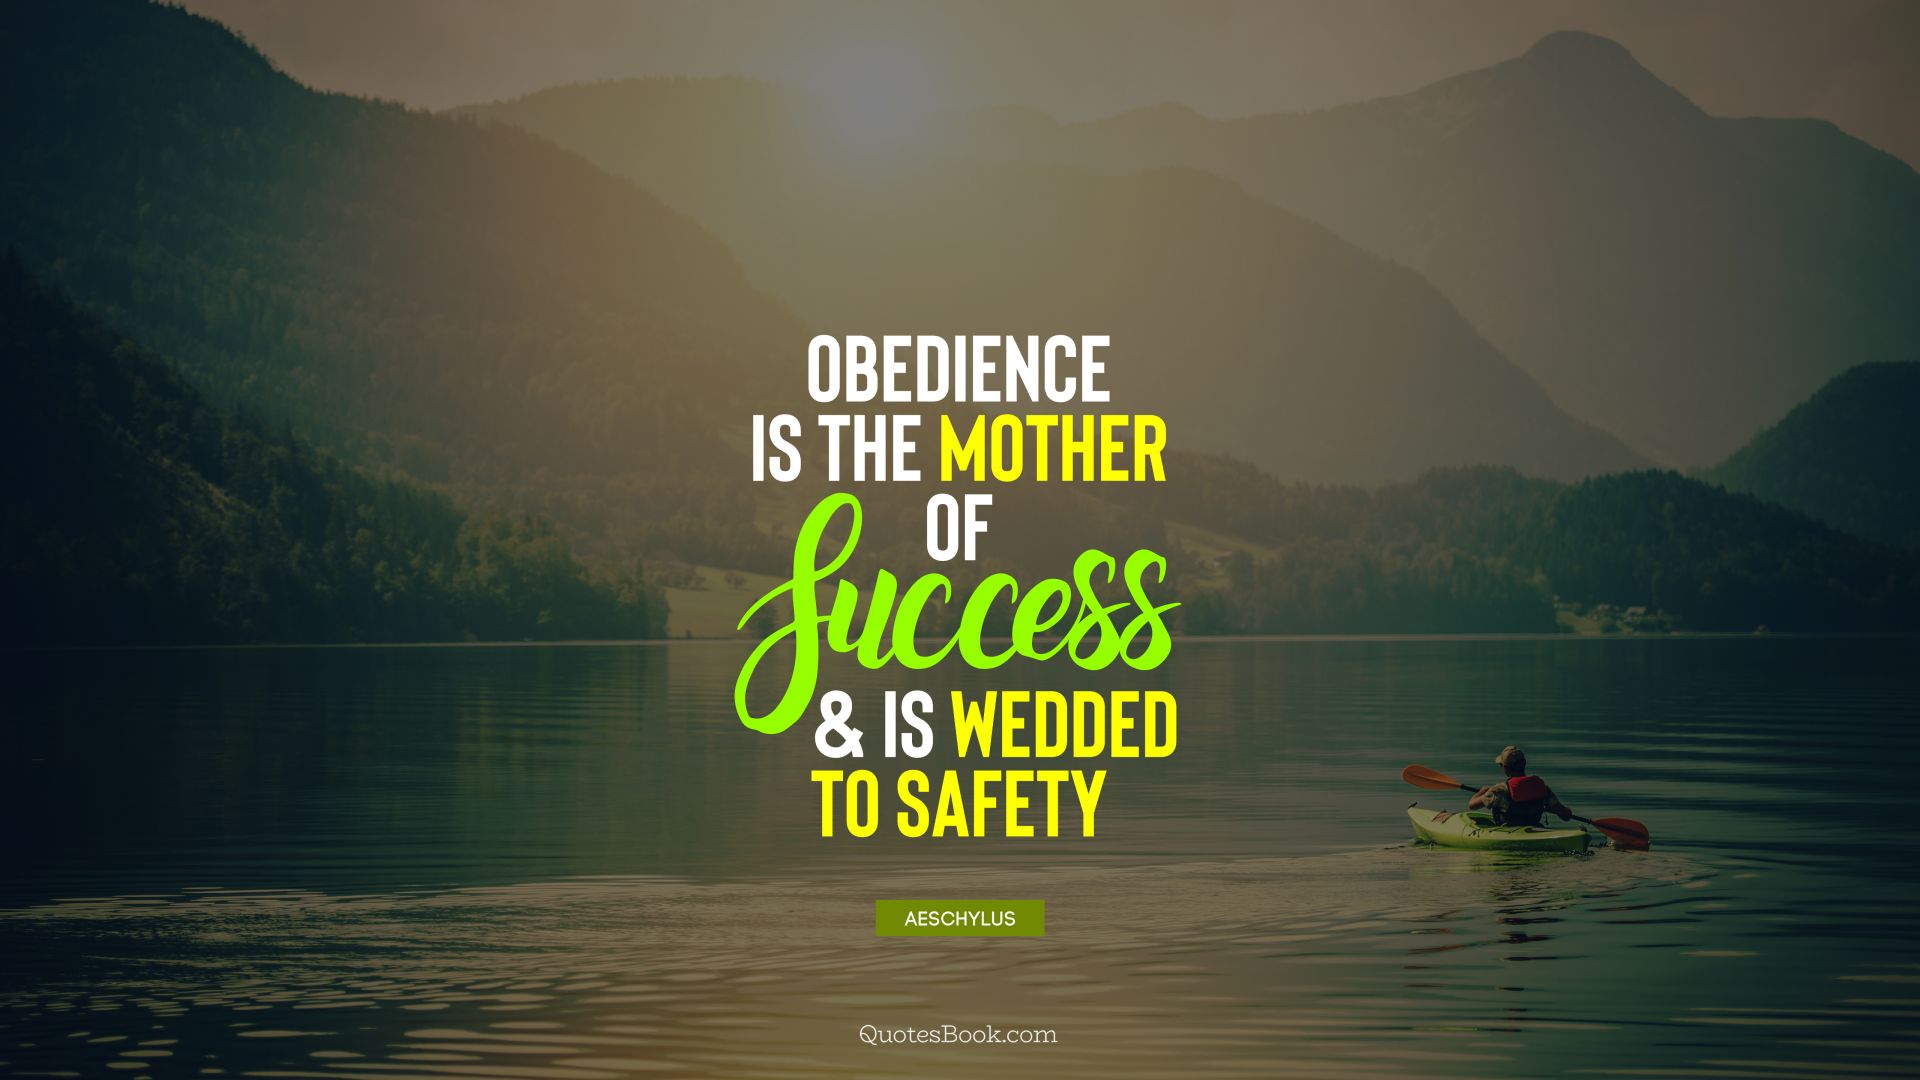 Obedience is the mother of success and is wedded to safety. - Quote by Aeschylus